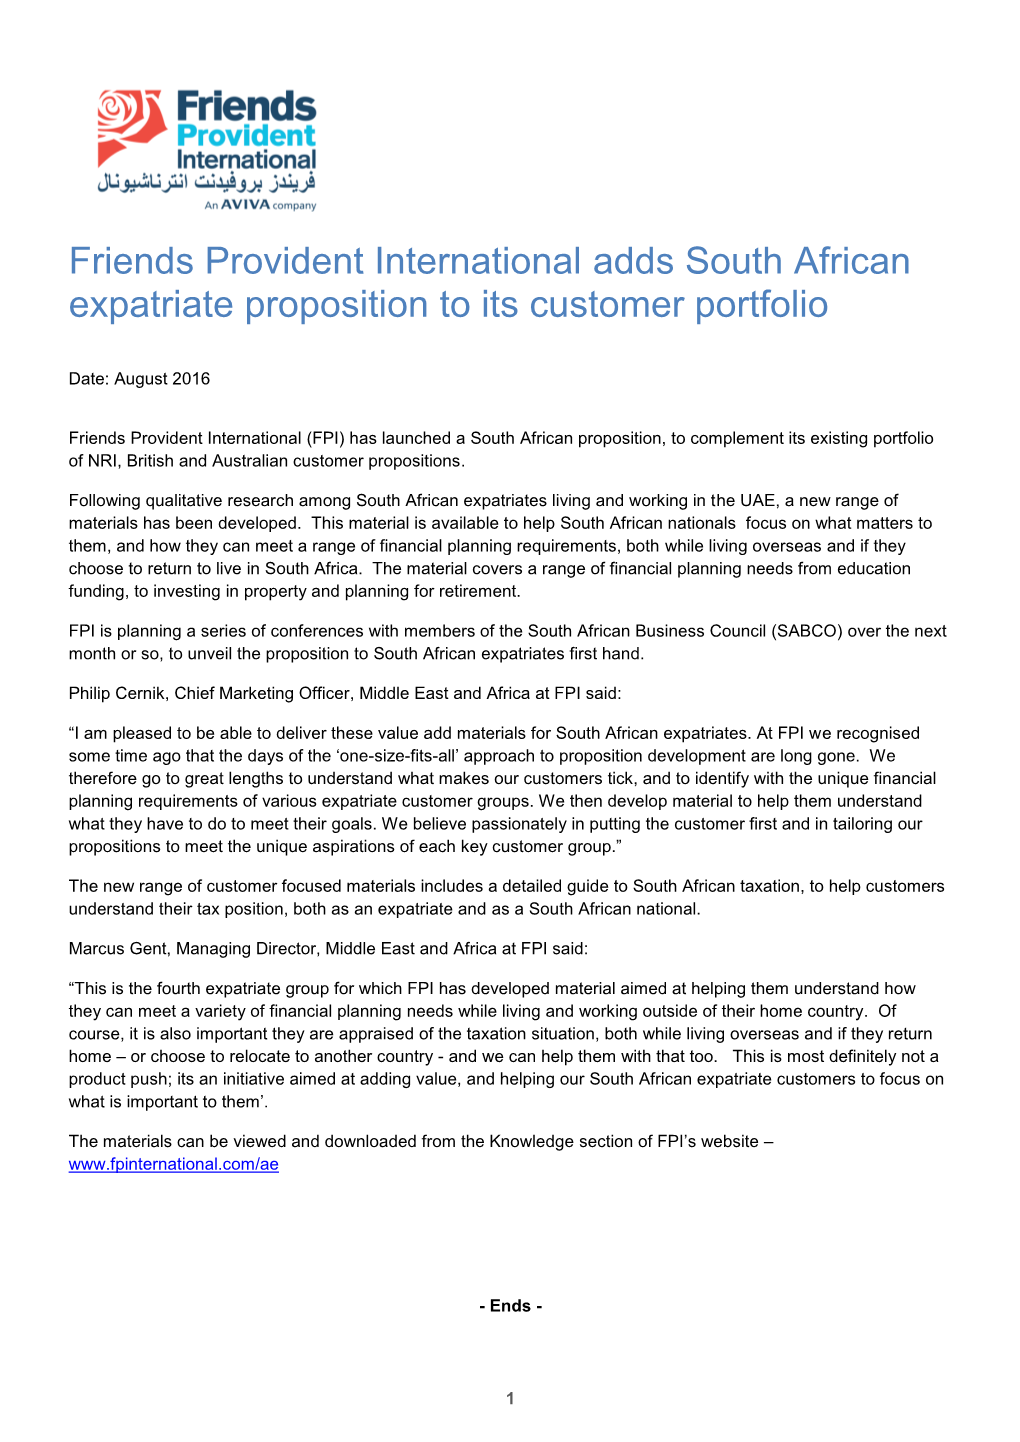 Friends Provident International Adds South African Expatriate Proposition to Its Customer Portfolio